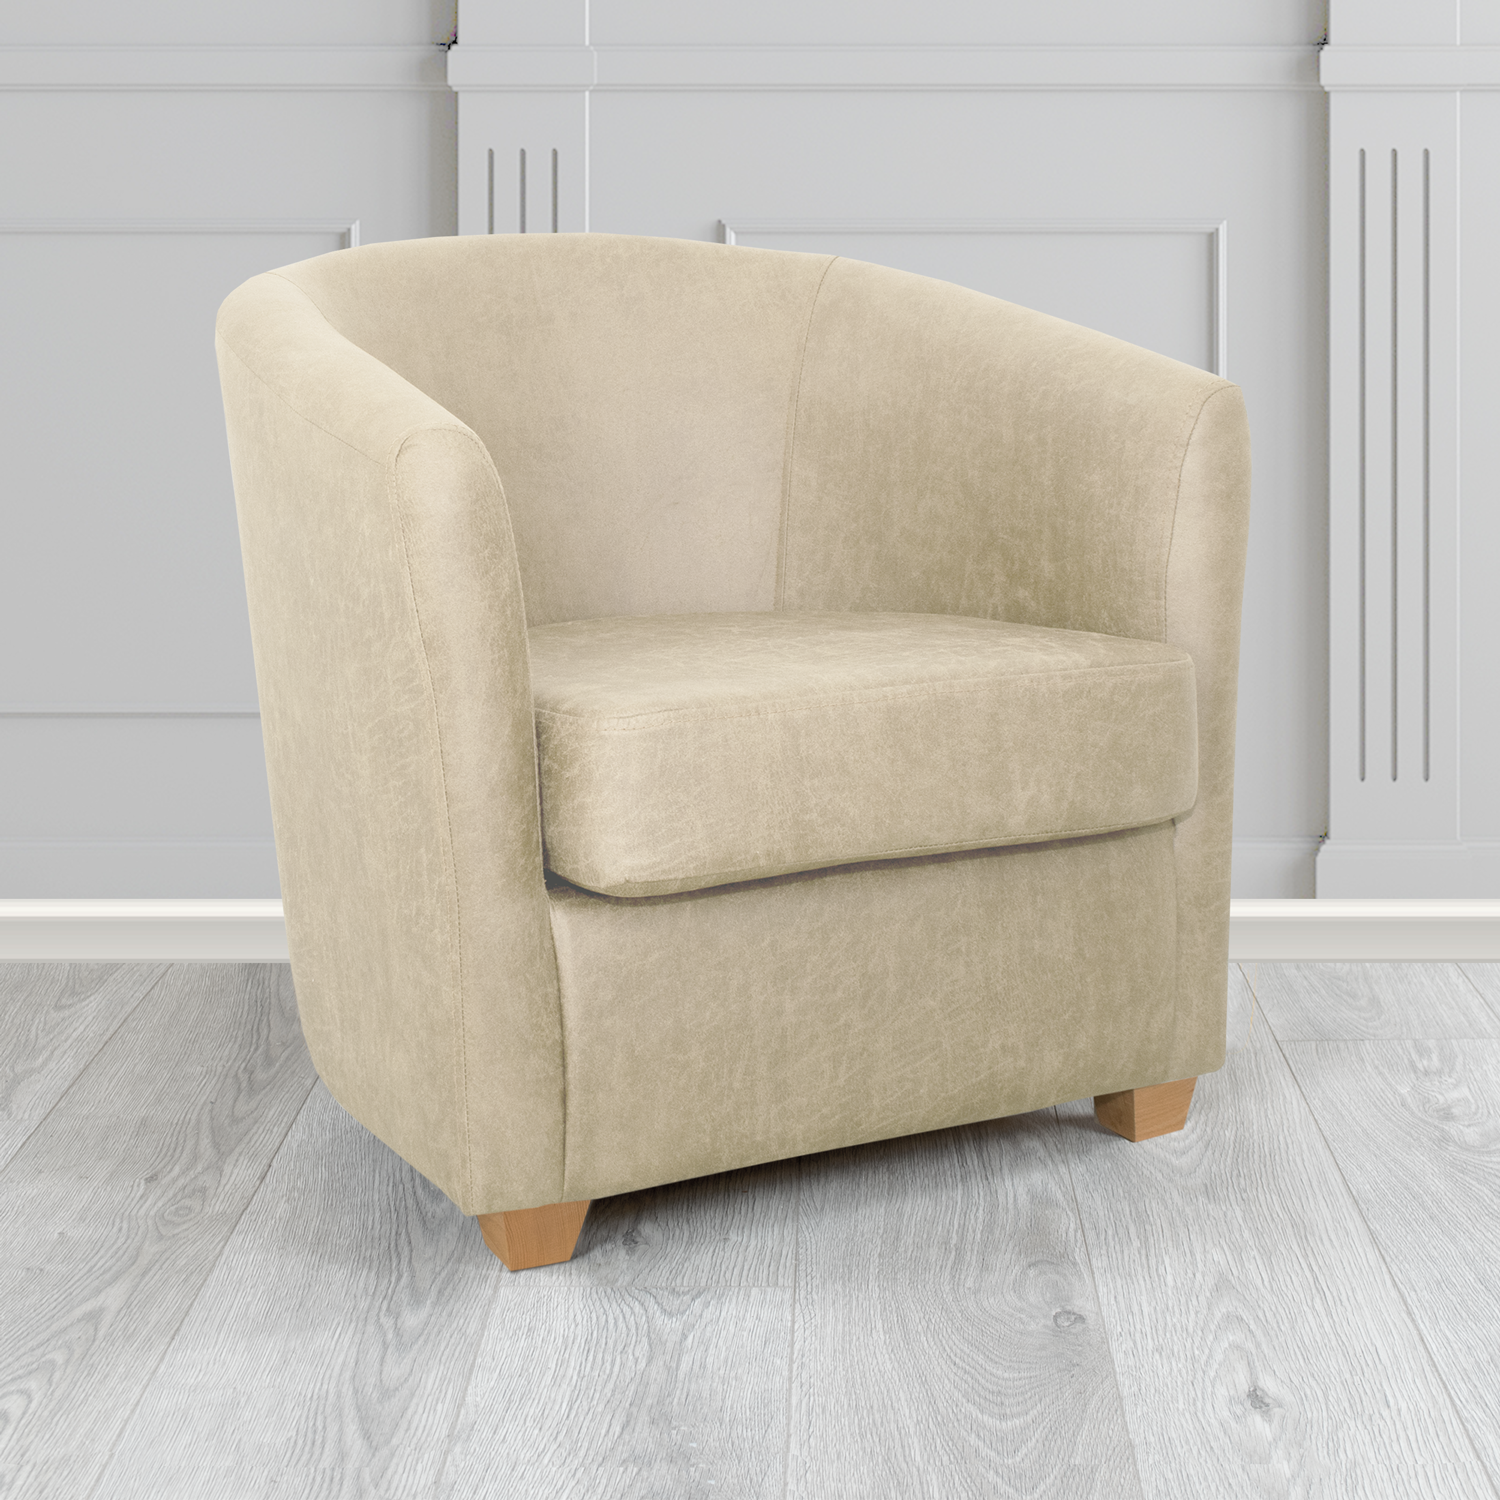 Cannes Tub Chair in Nevada Beige Faux Leather - The Tub Chair Shop